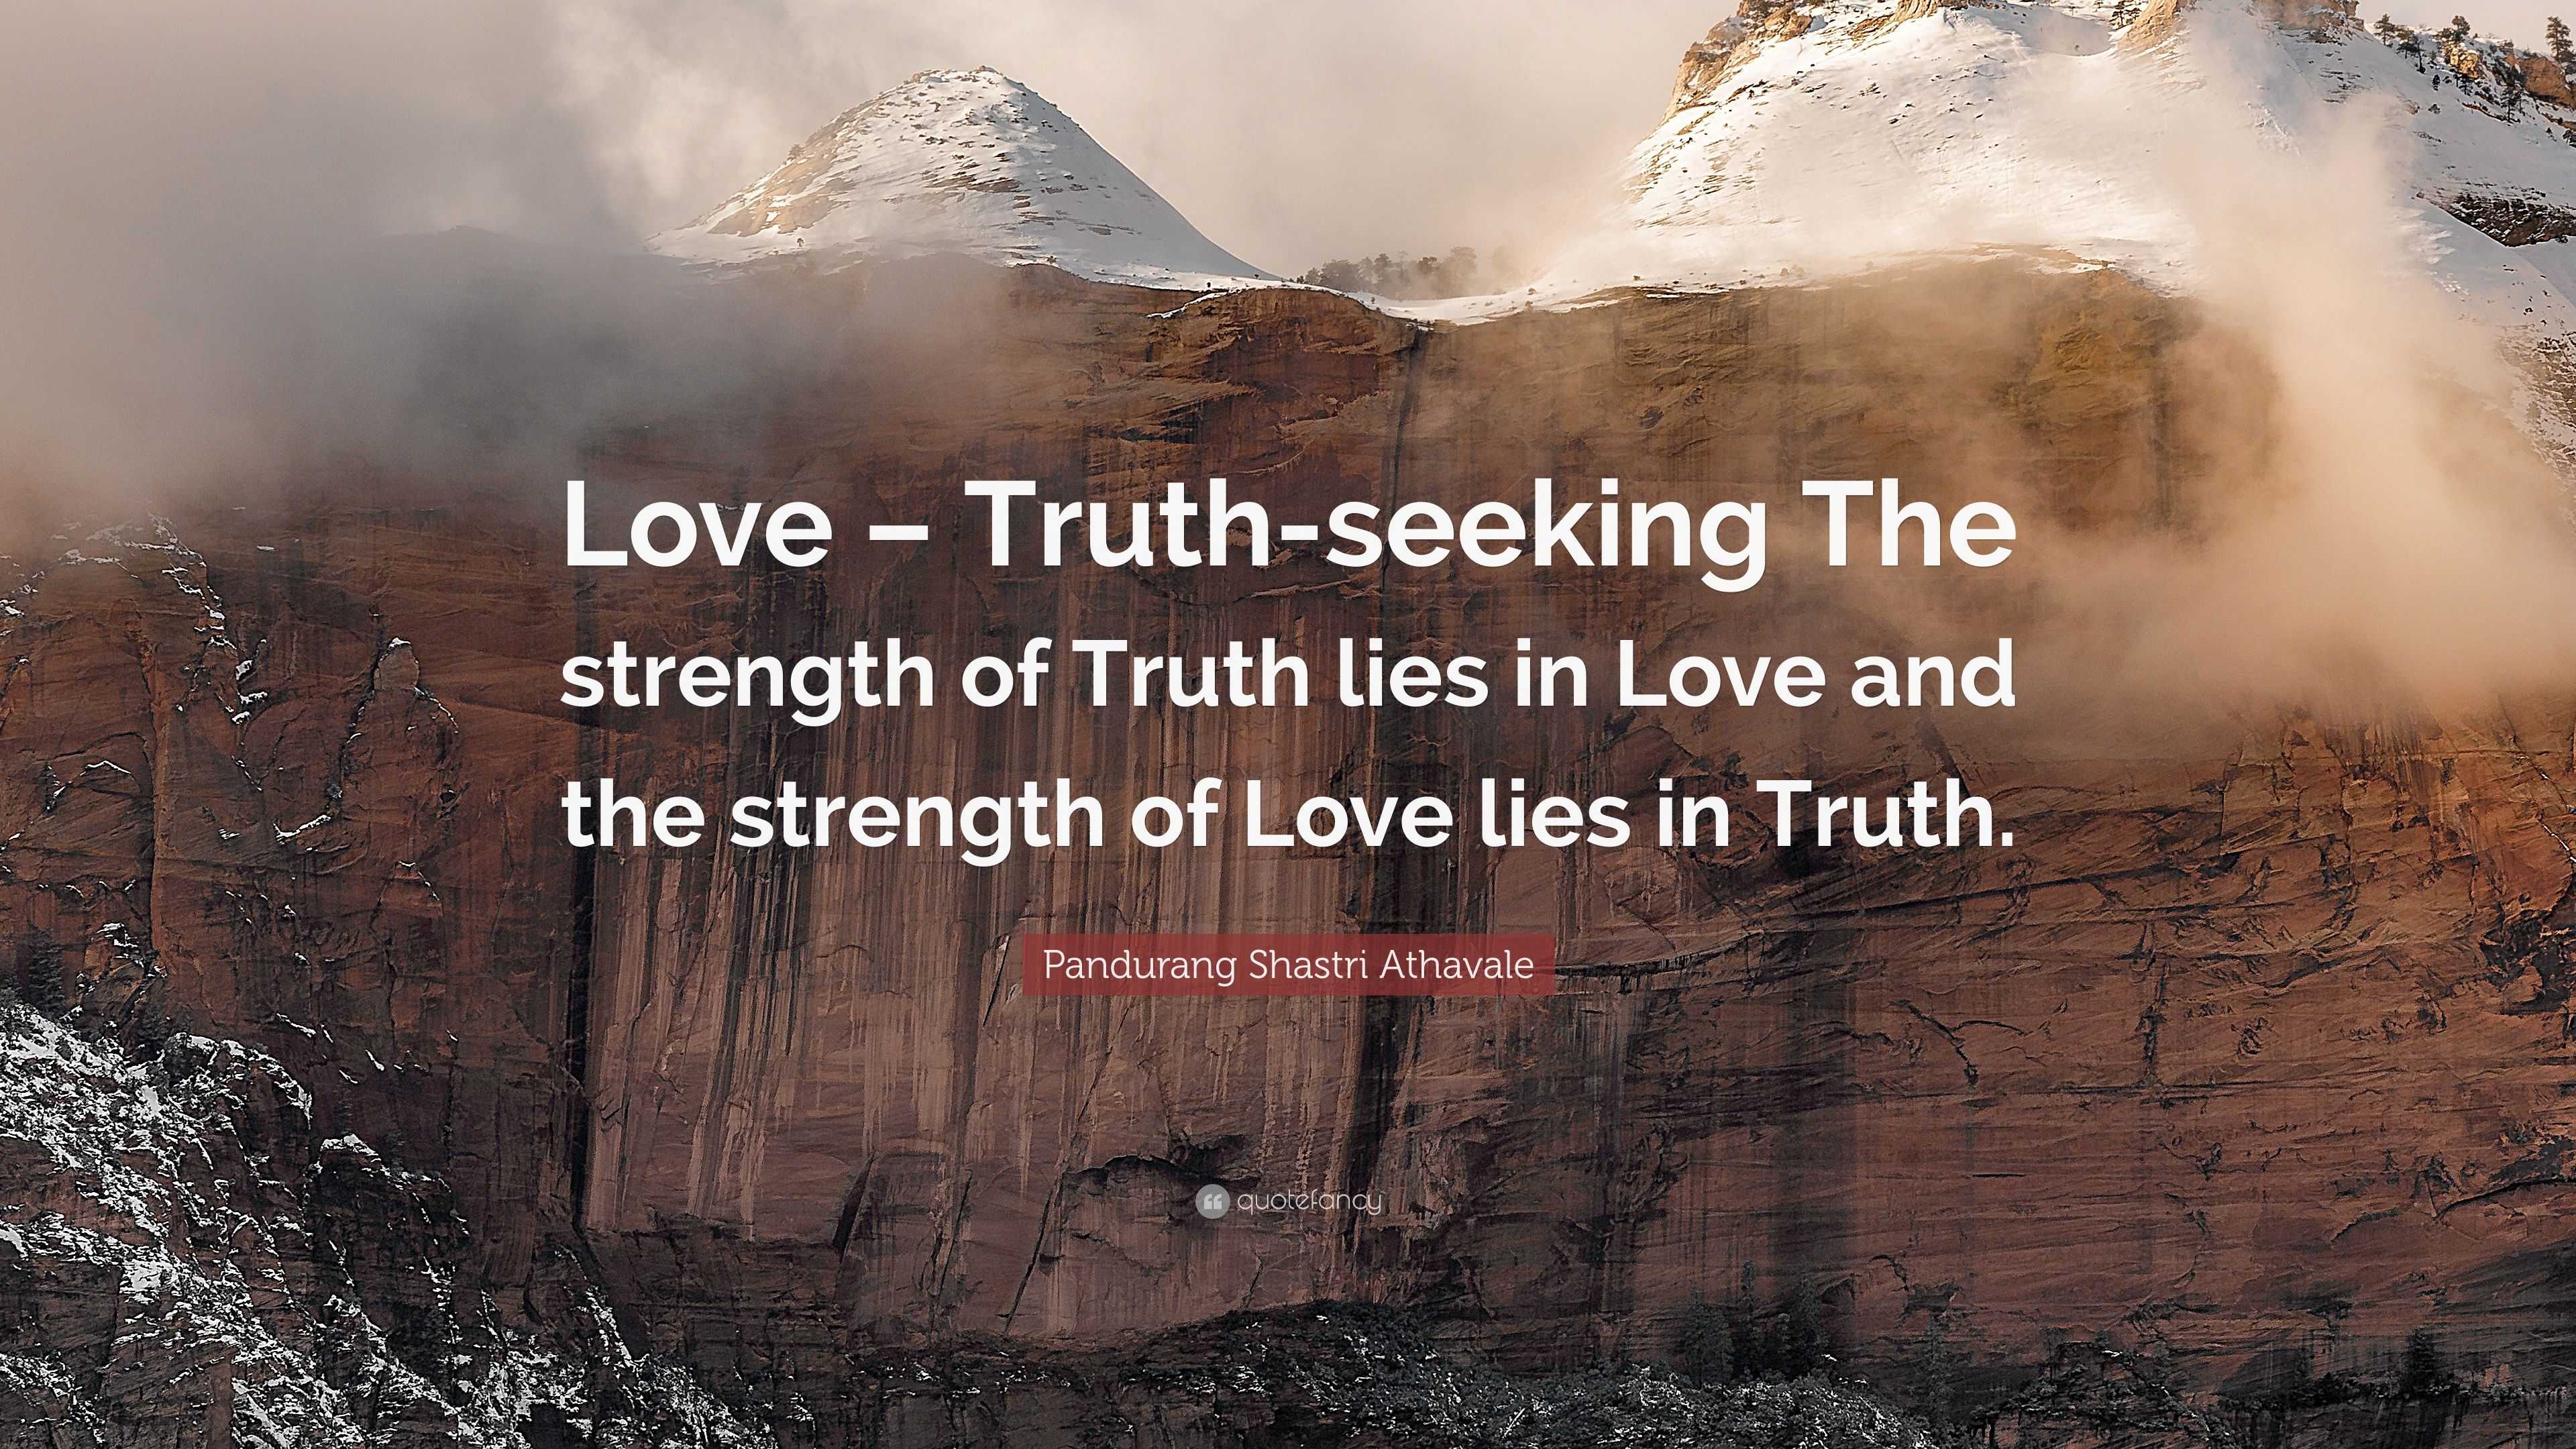 Seeking The Truth – For The Love